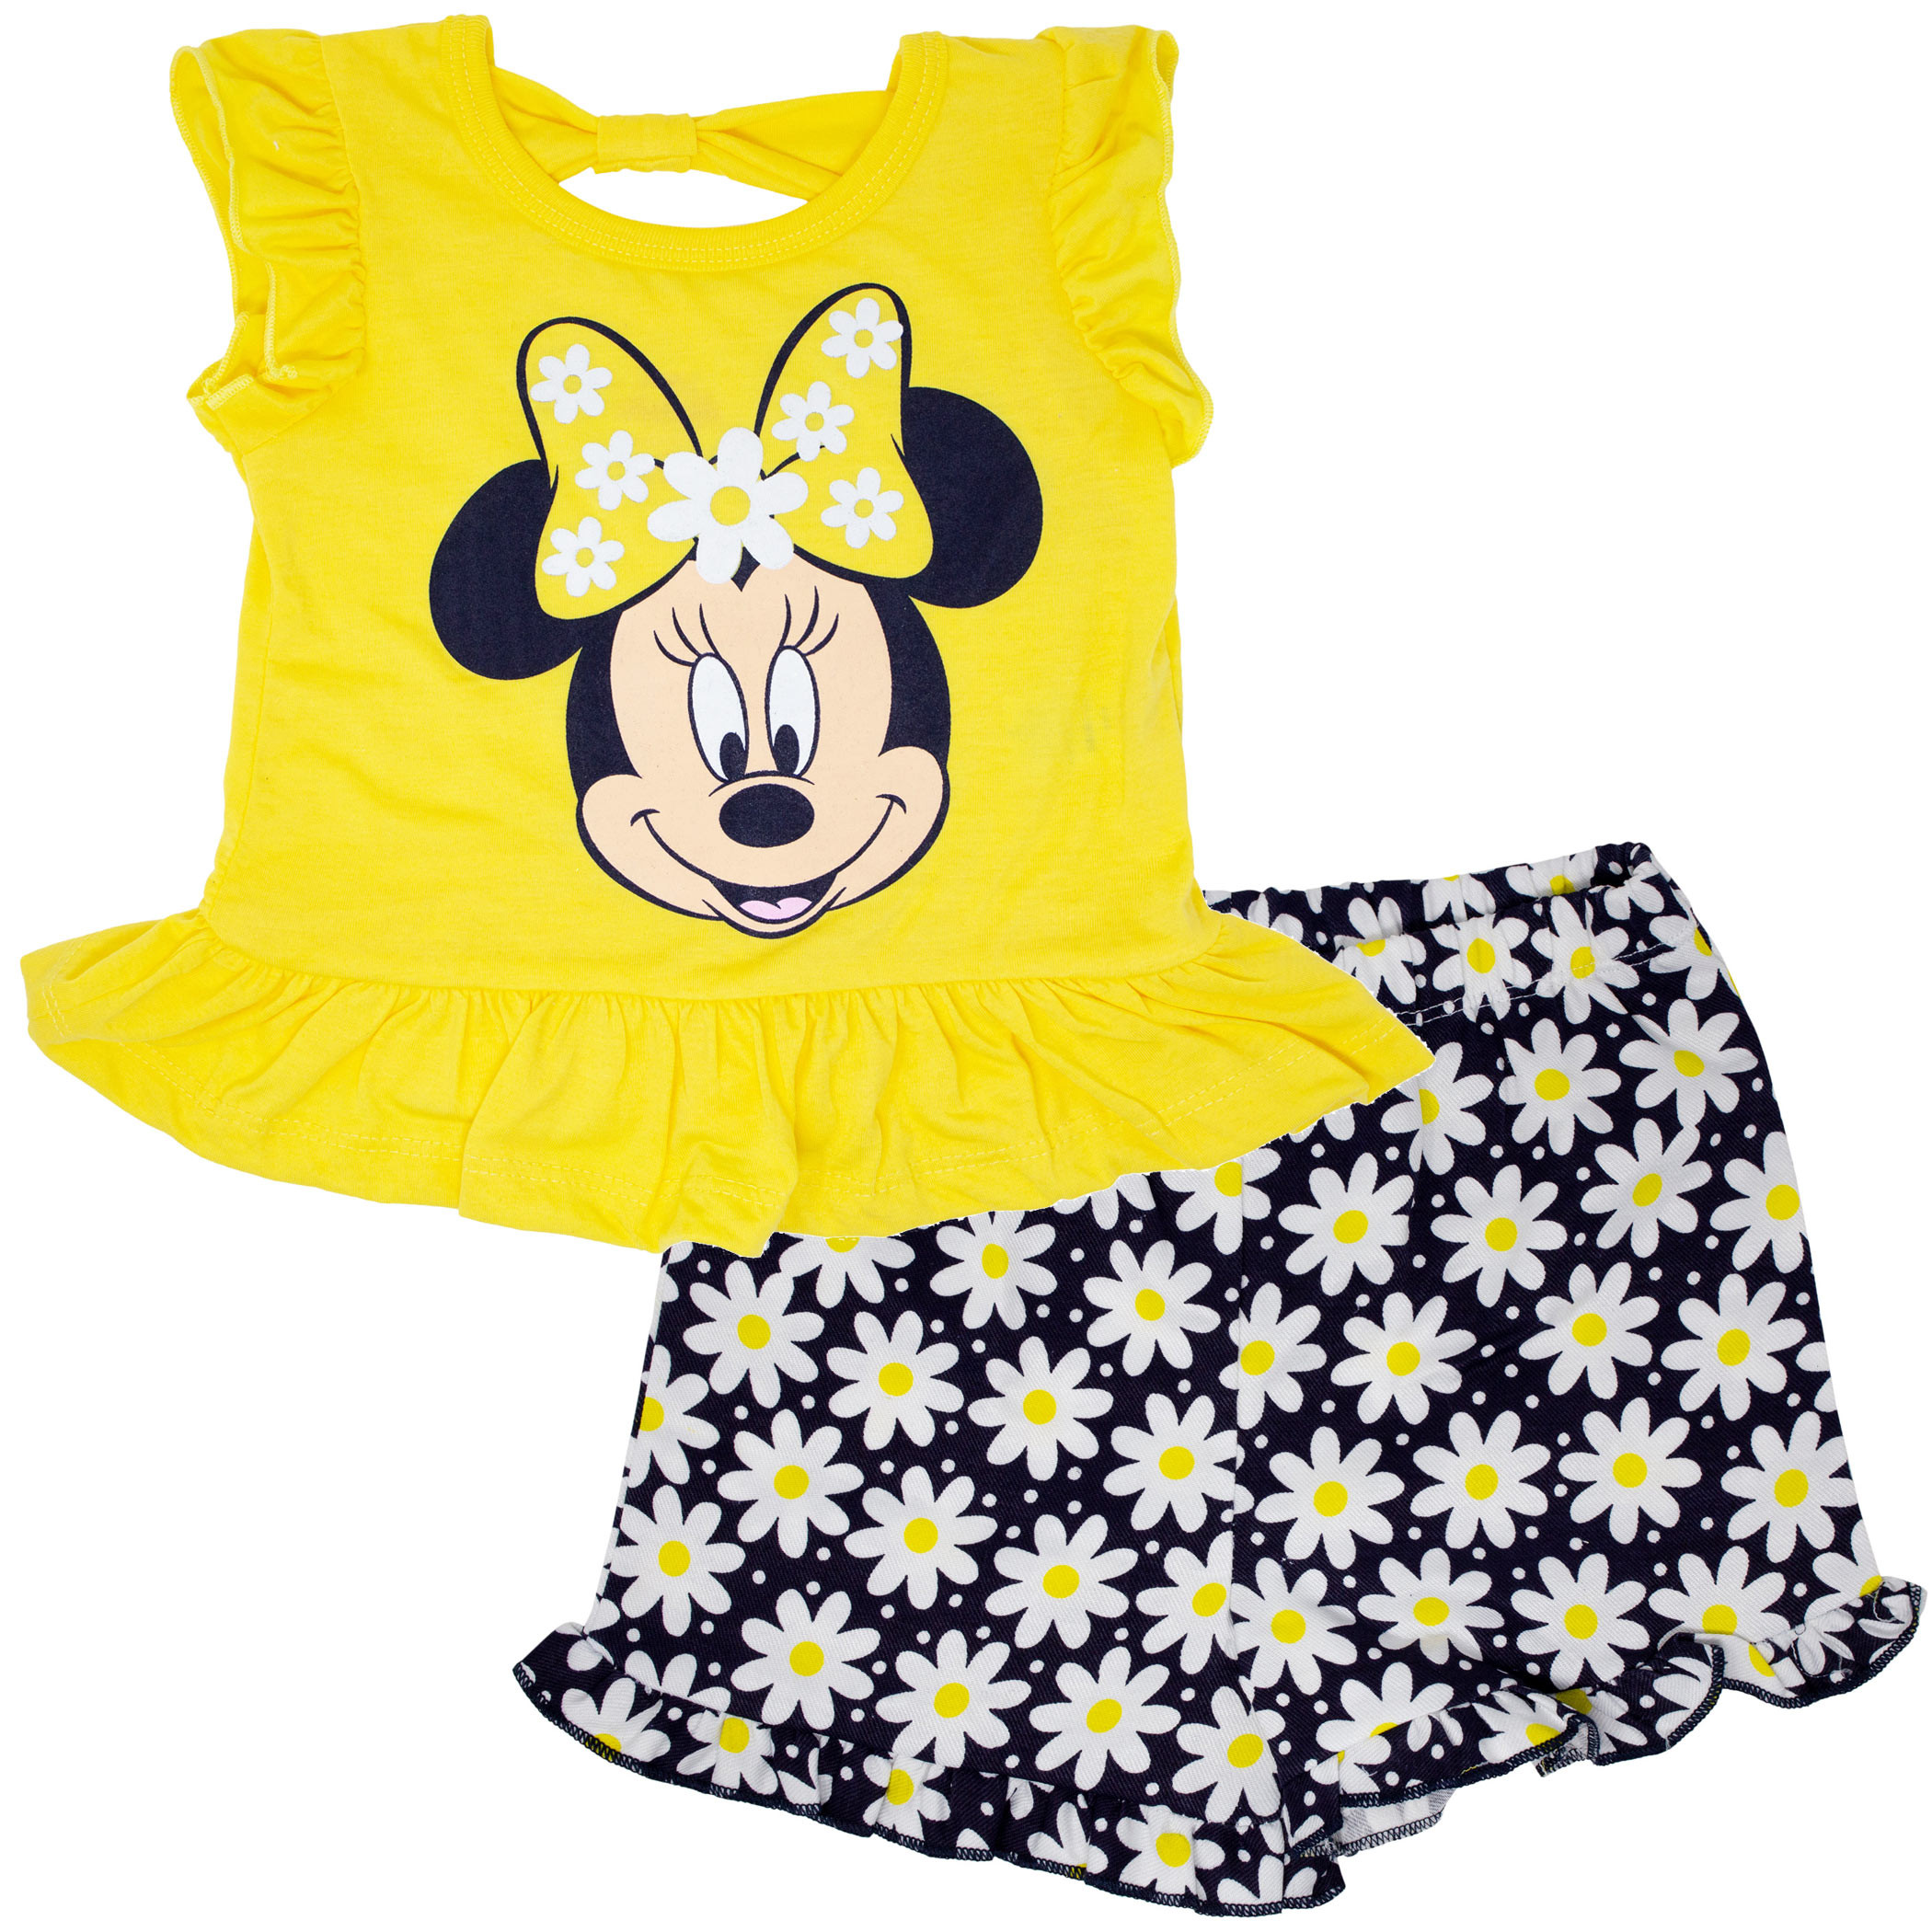 Minnie Mouse Puff Print Daisy Baby Toddler Girls Shirt and Shorts Set